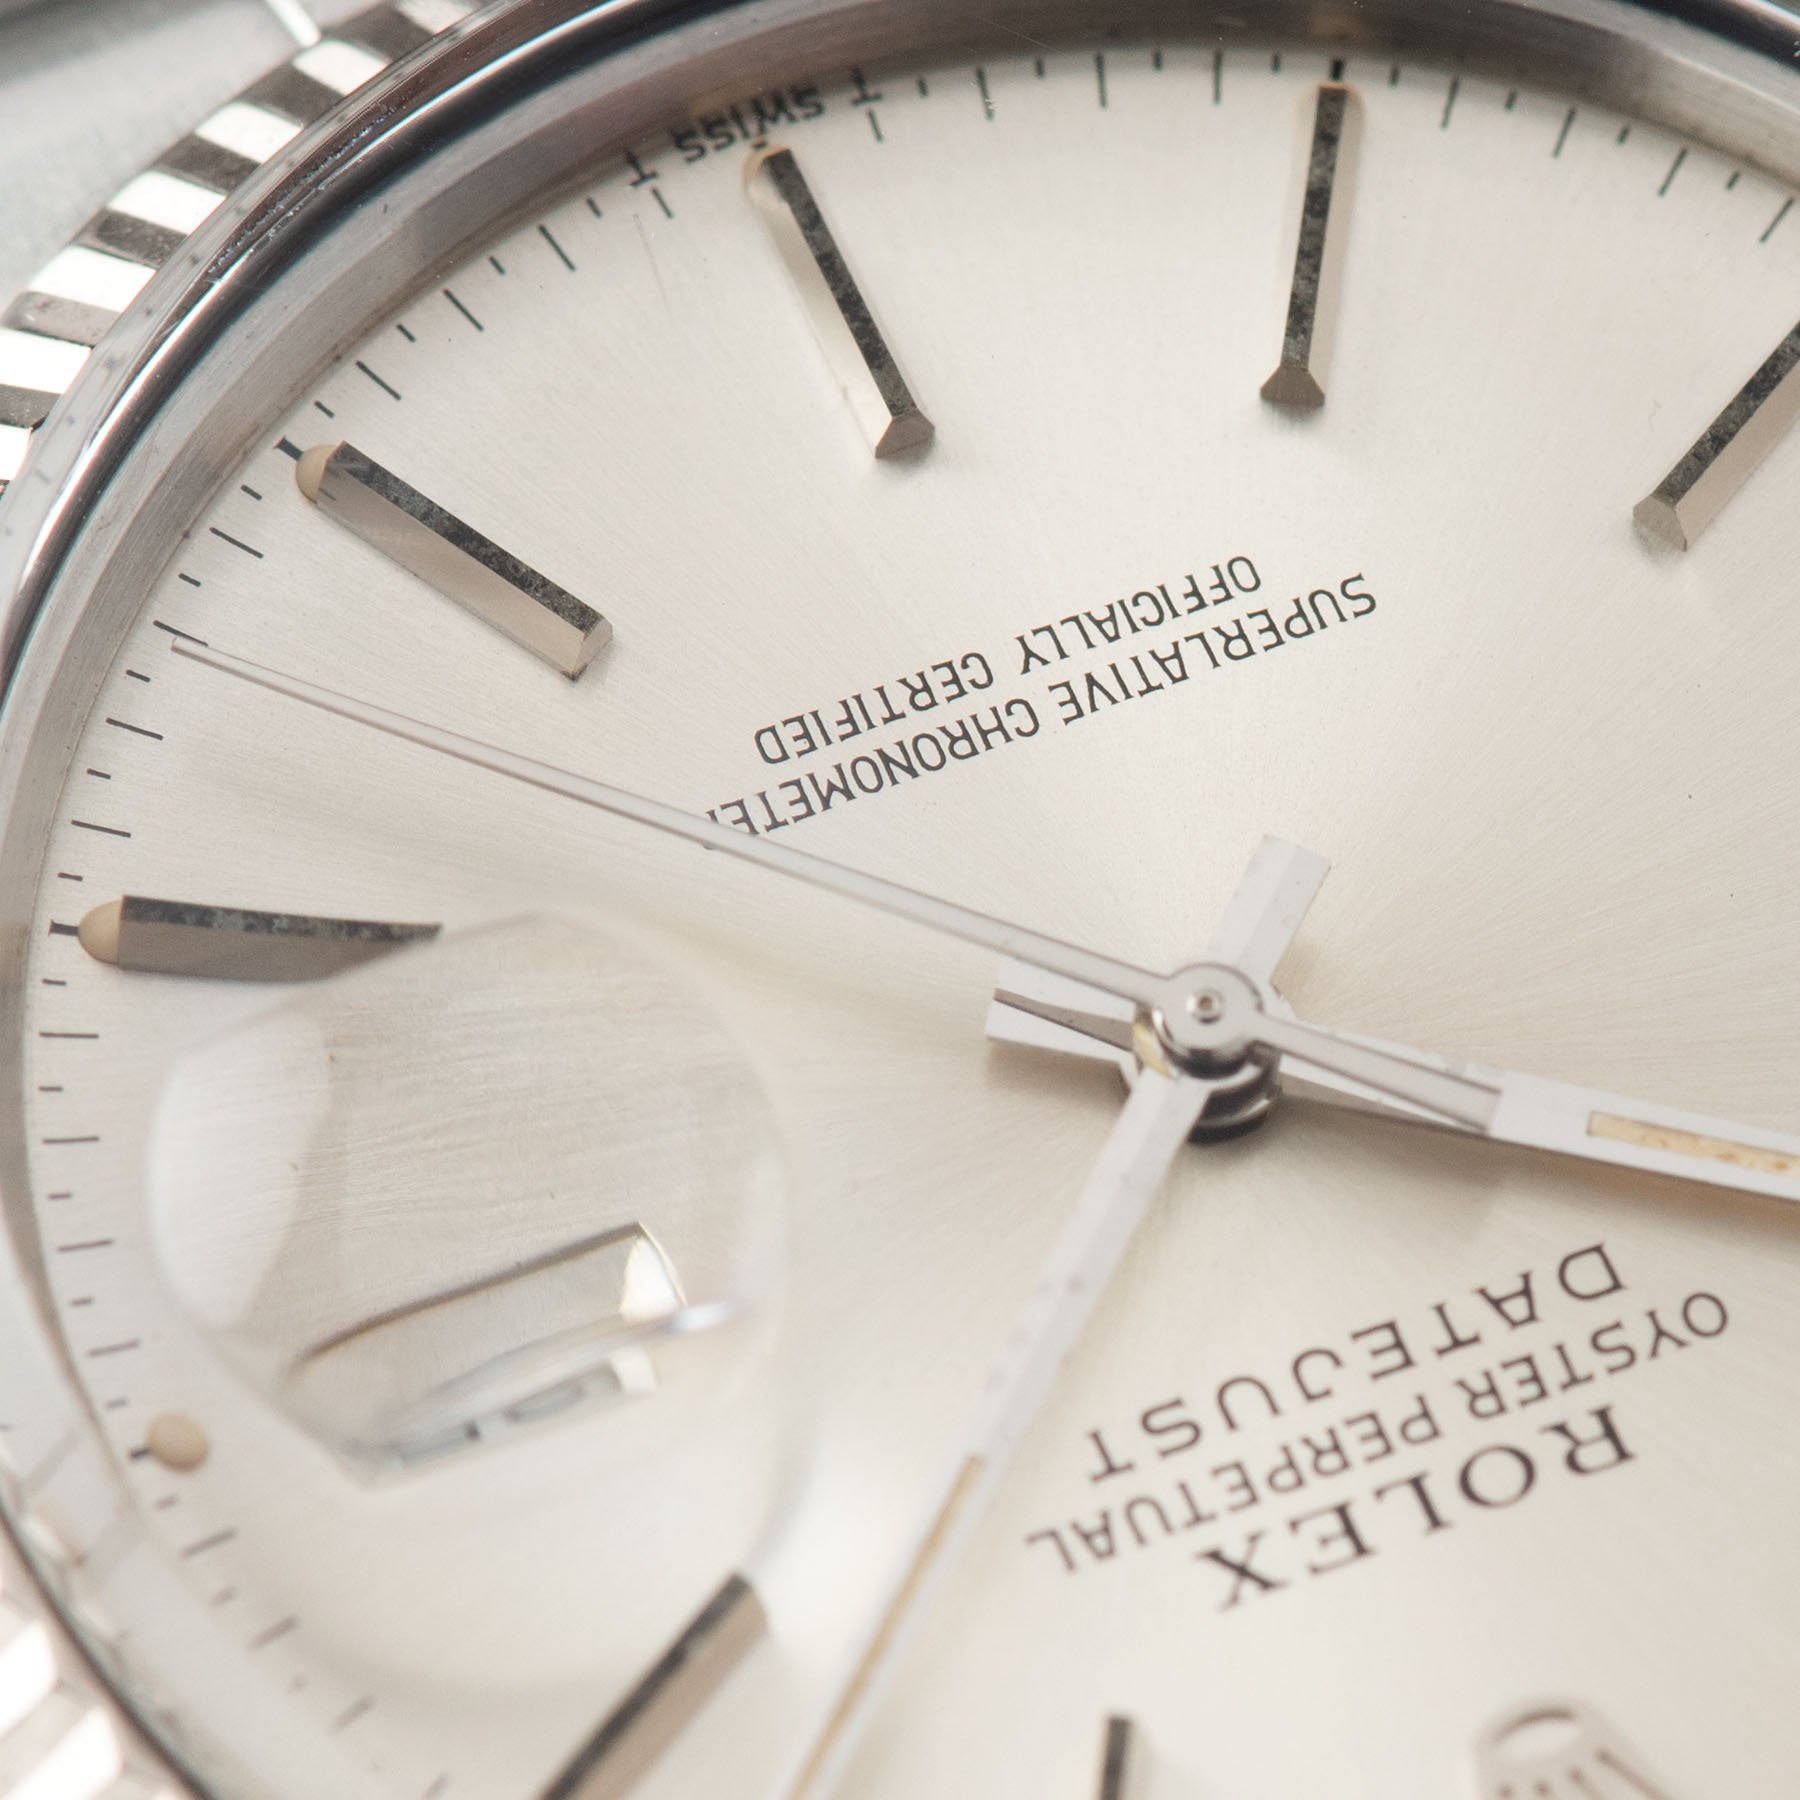 Rolex Datejust Reference 16014 Silver Dial